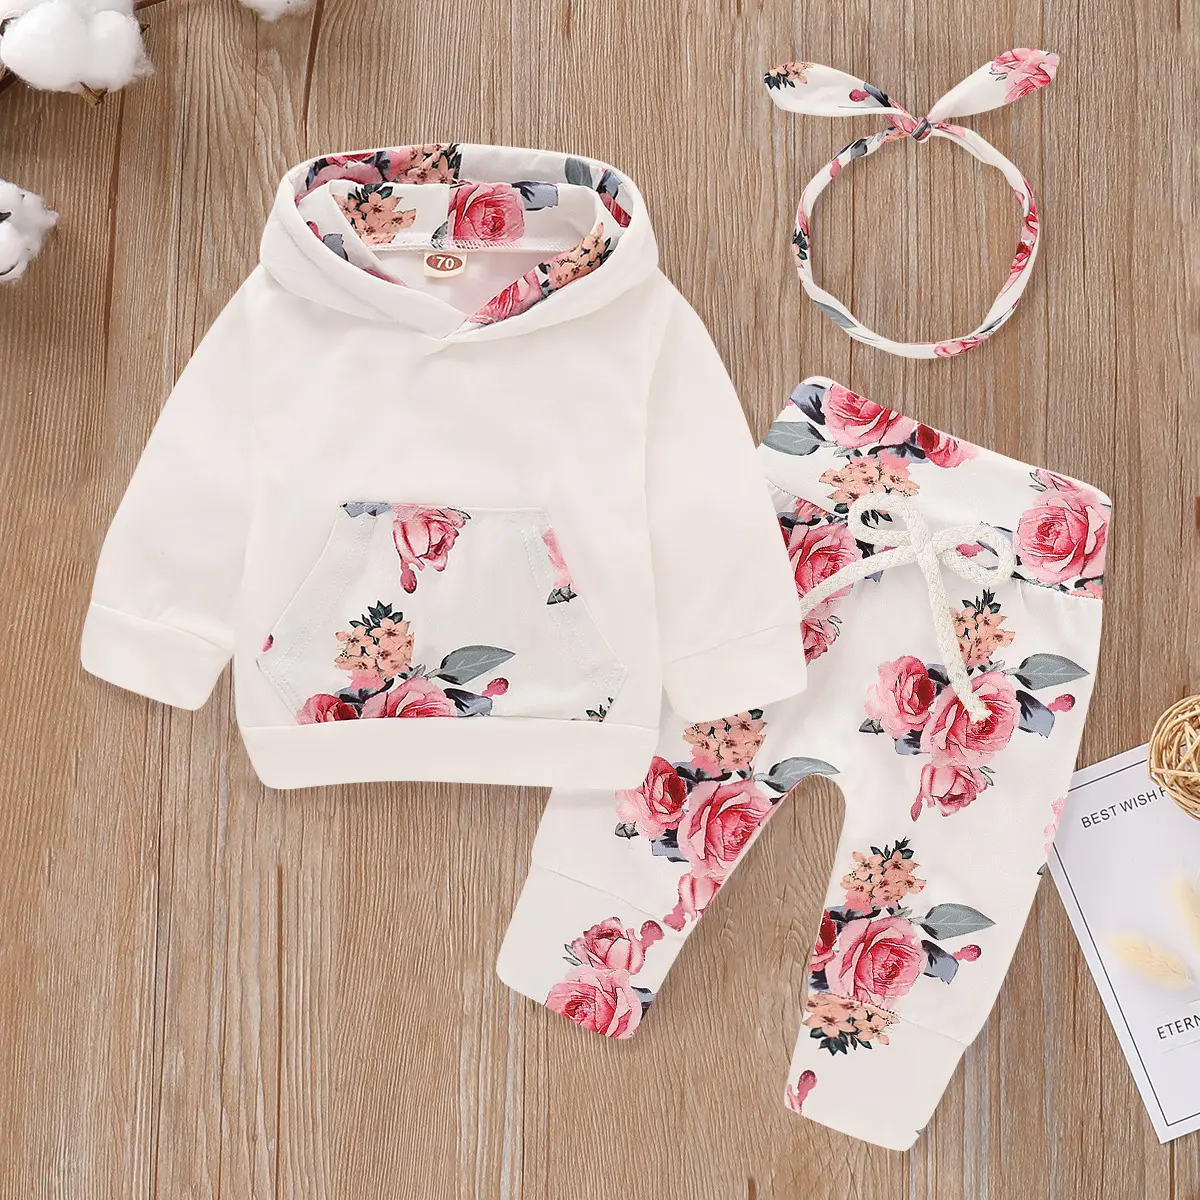 Popular Fashion Clothing Casual Hooded Long Sleeve Top Girls Summer Floral 3-Piece Children's Sportswear Set